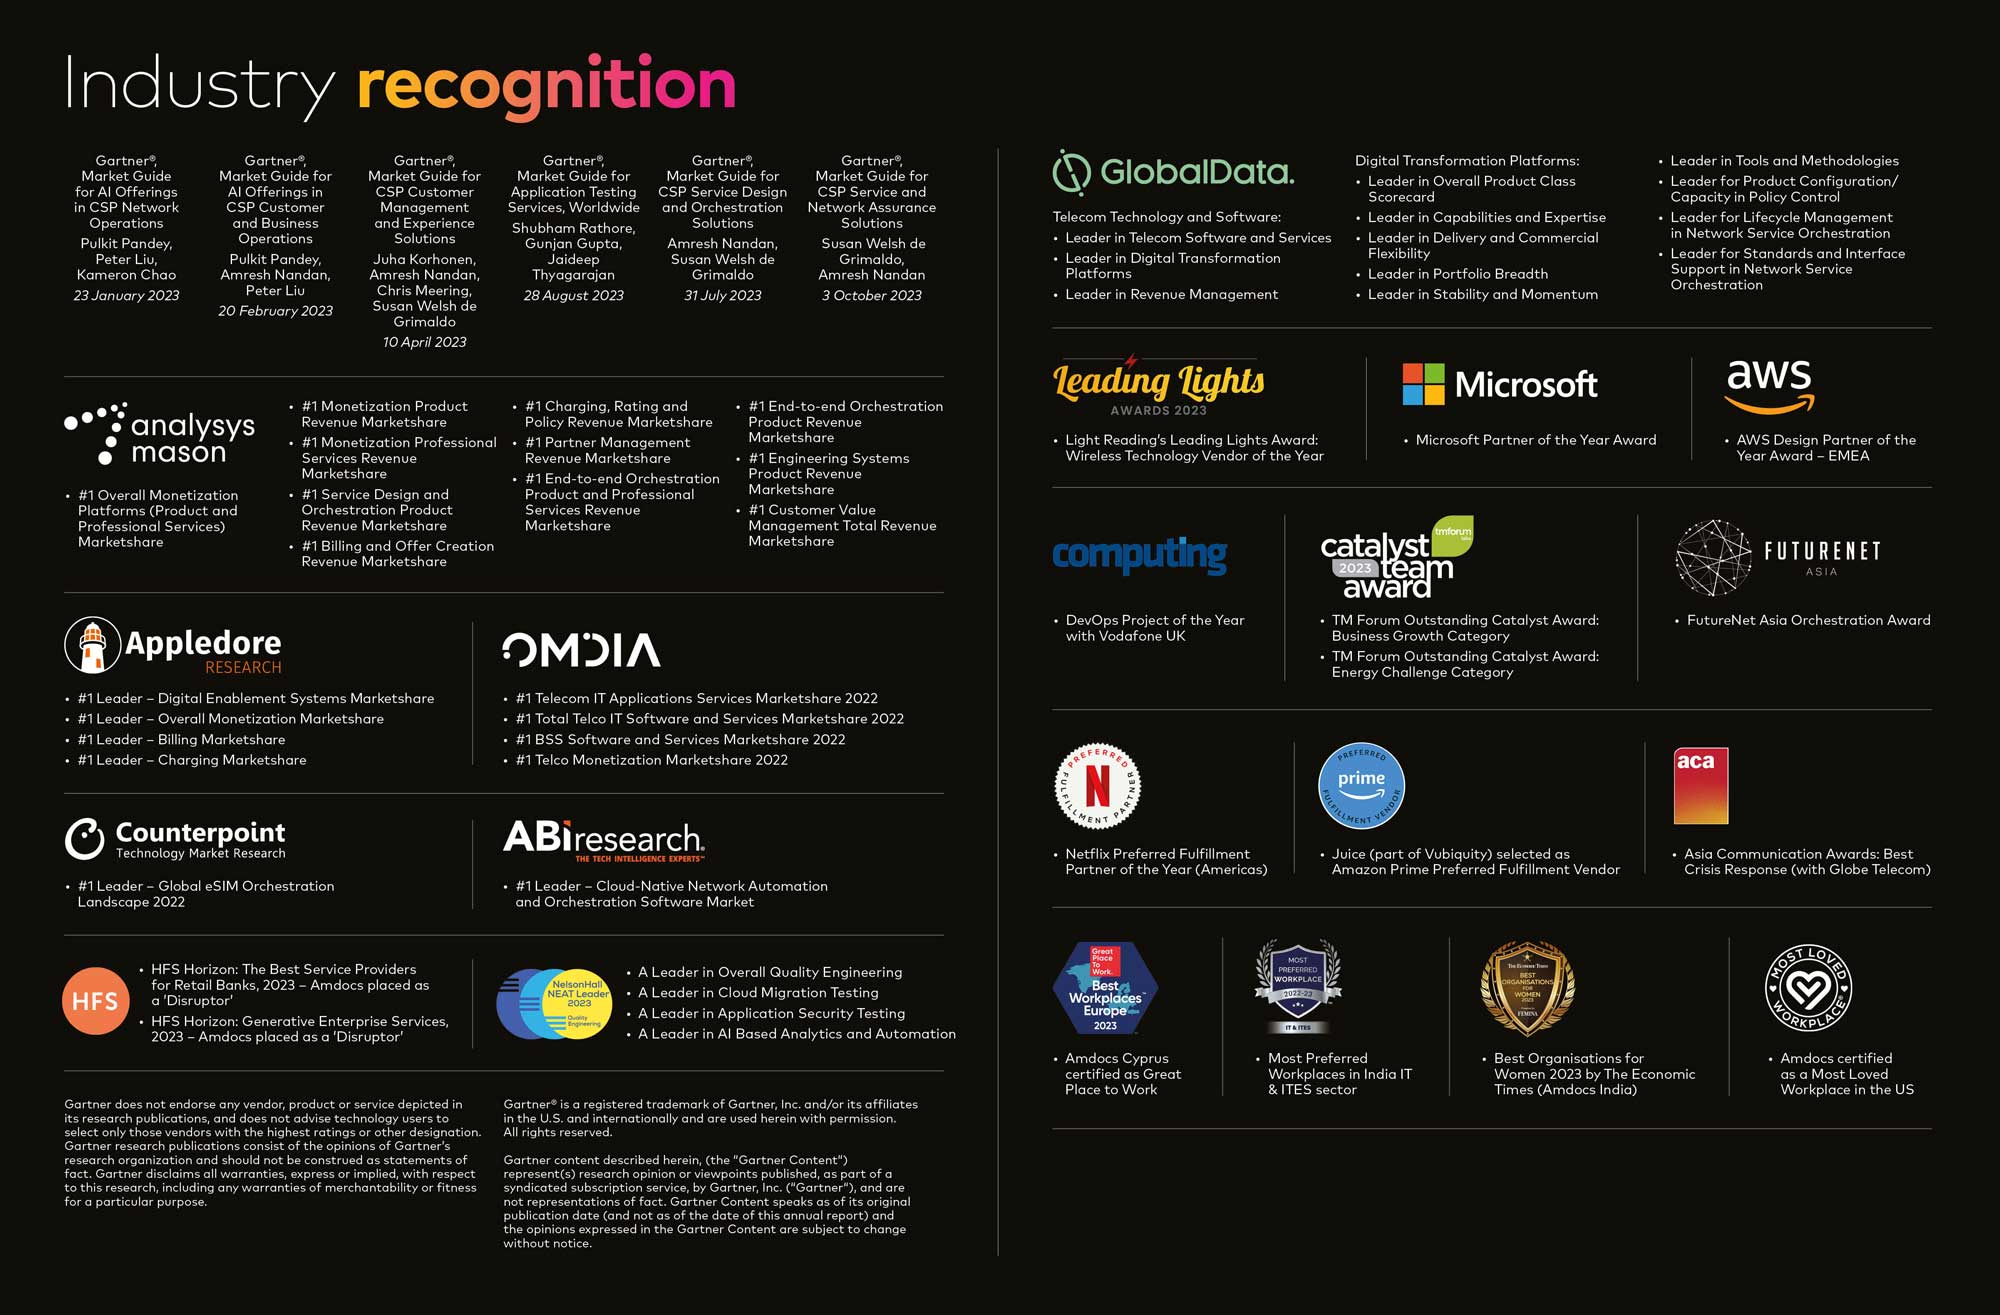 Industry recognition table